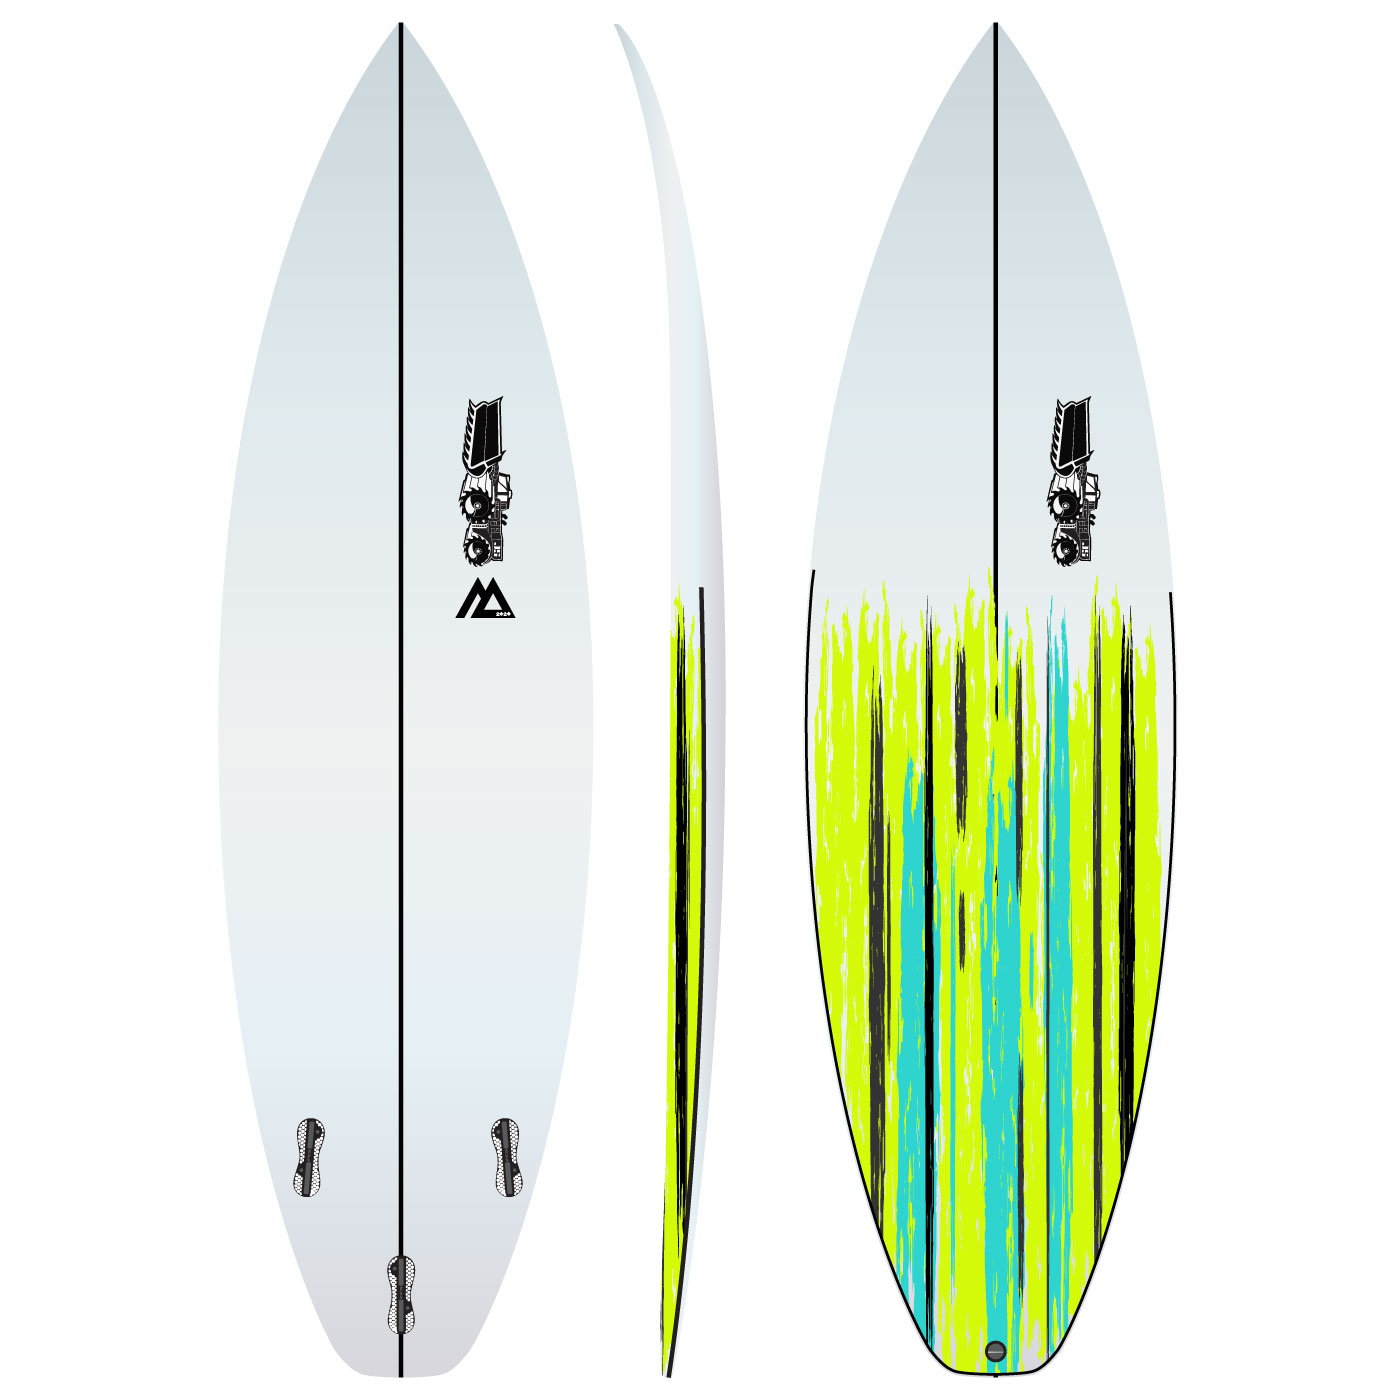 JS INDUSTRIES FORGET ME NOT 2 ROUND TAIL - For Sale - Best Price